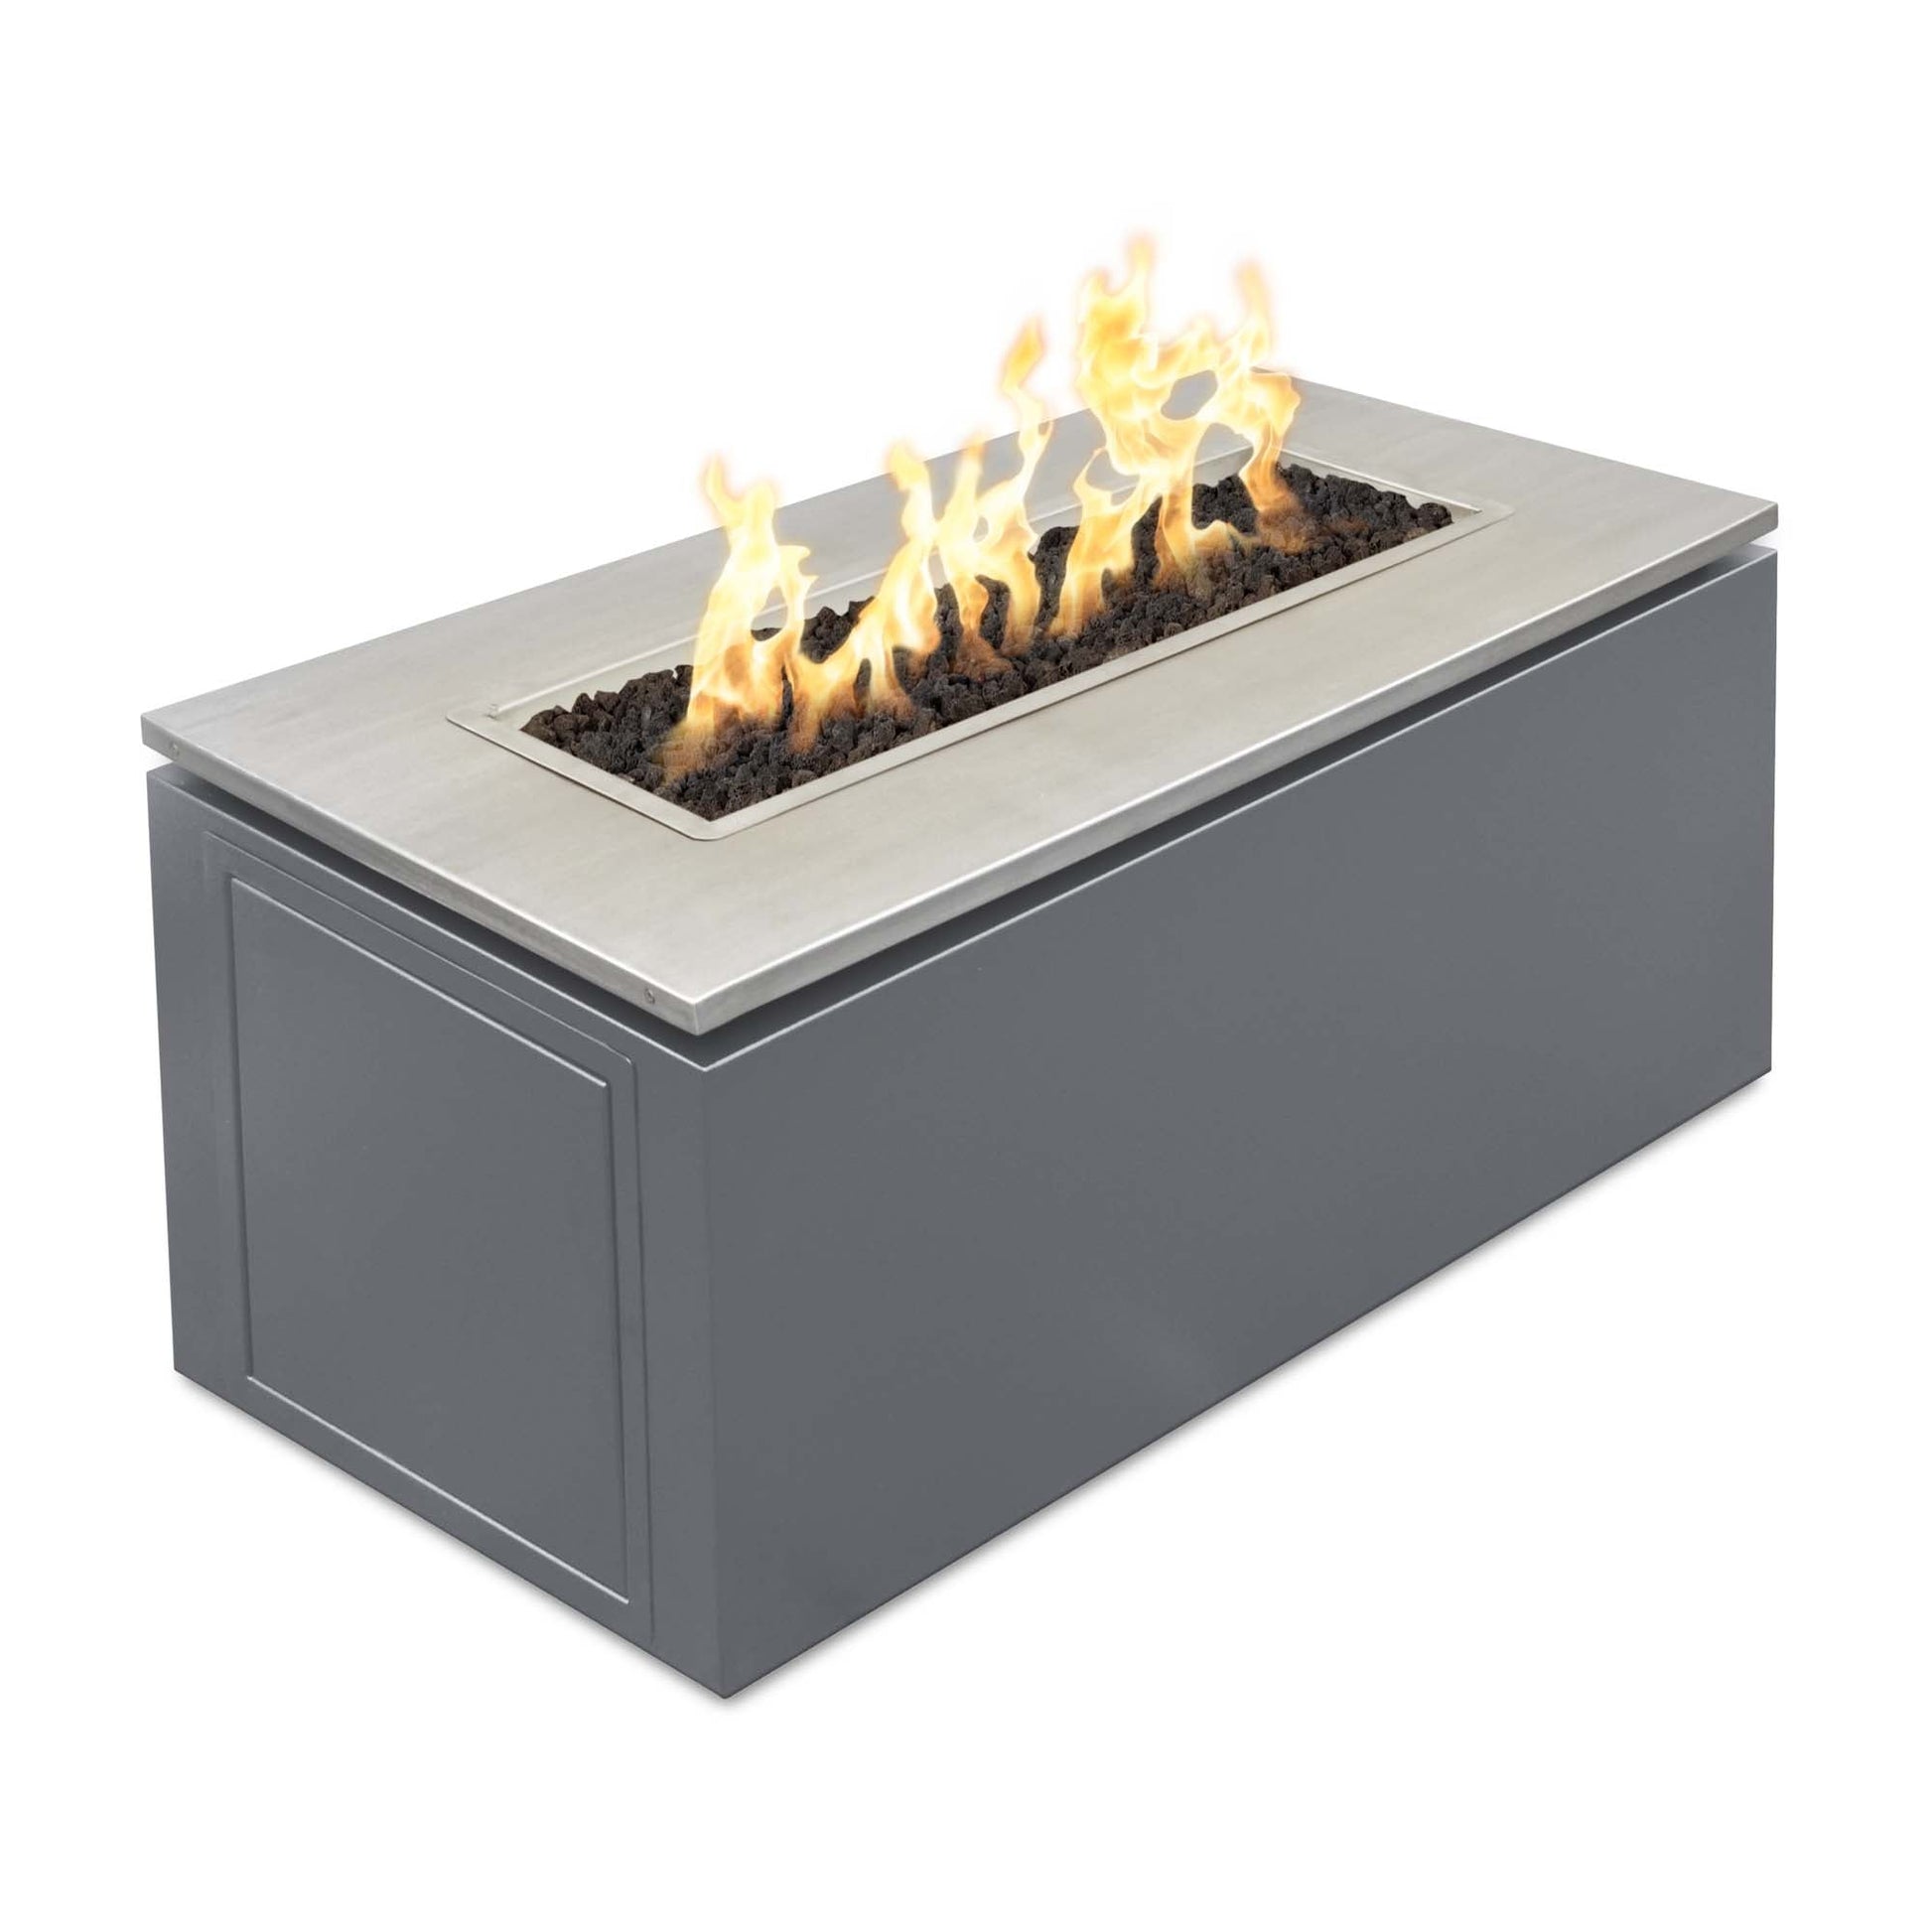 The Outdoor Plus Rectangular Merona 46" Corten Steel Natural Gas Fire Pit with 110V Electronic Ignition